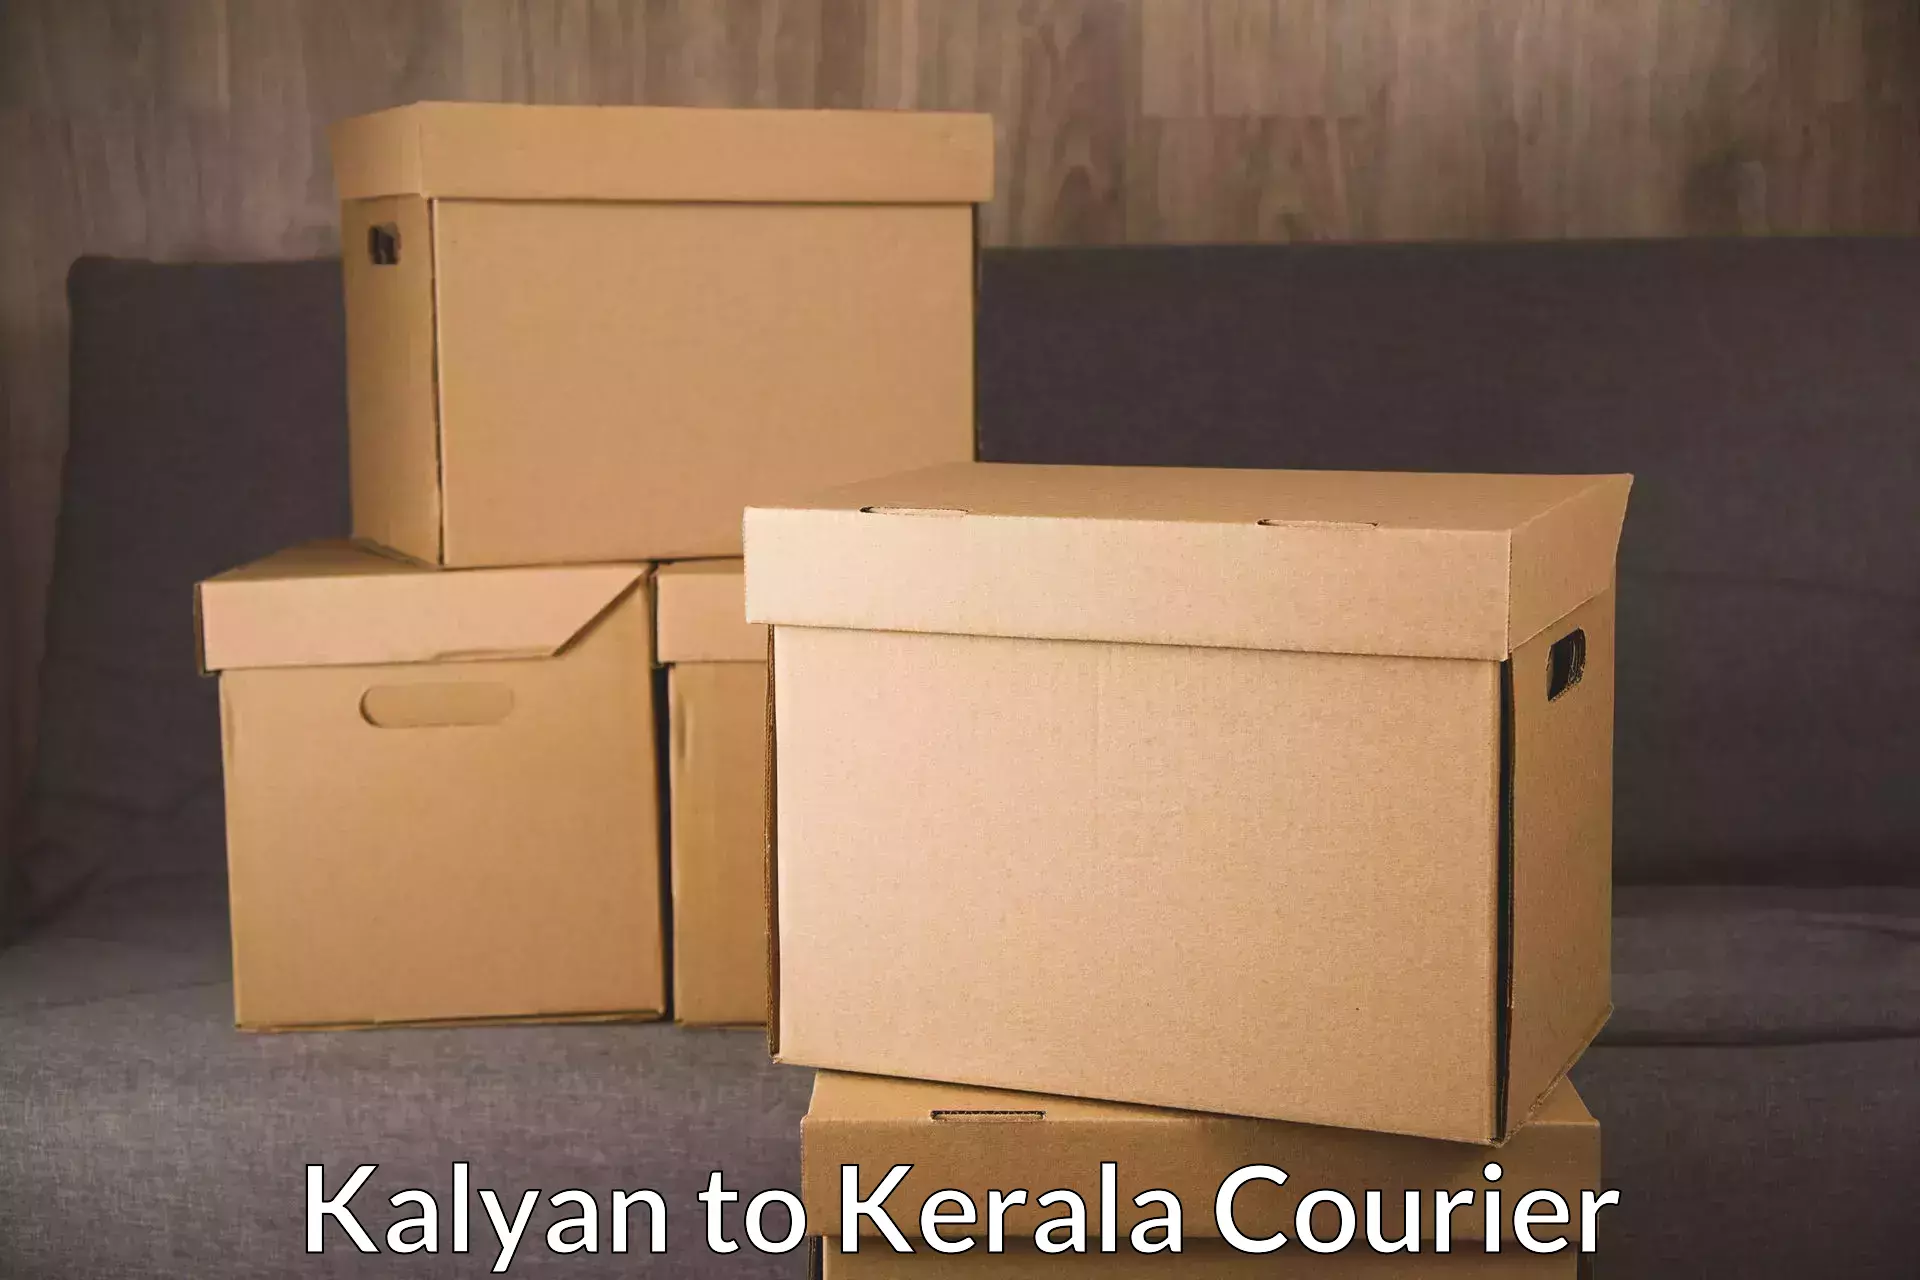 Flexible delivery schedules Kalyan to Kerala